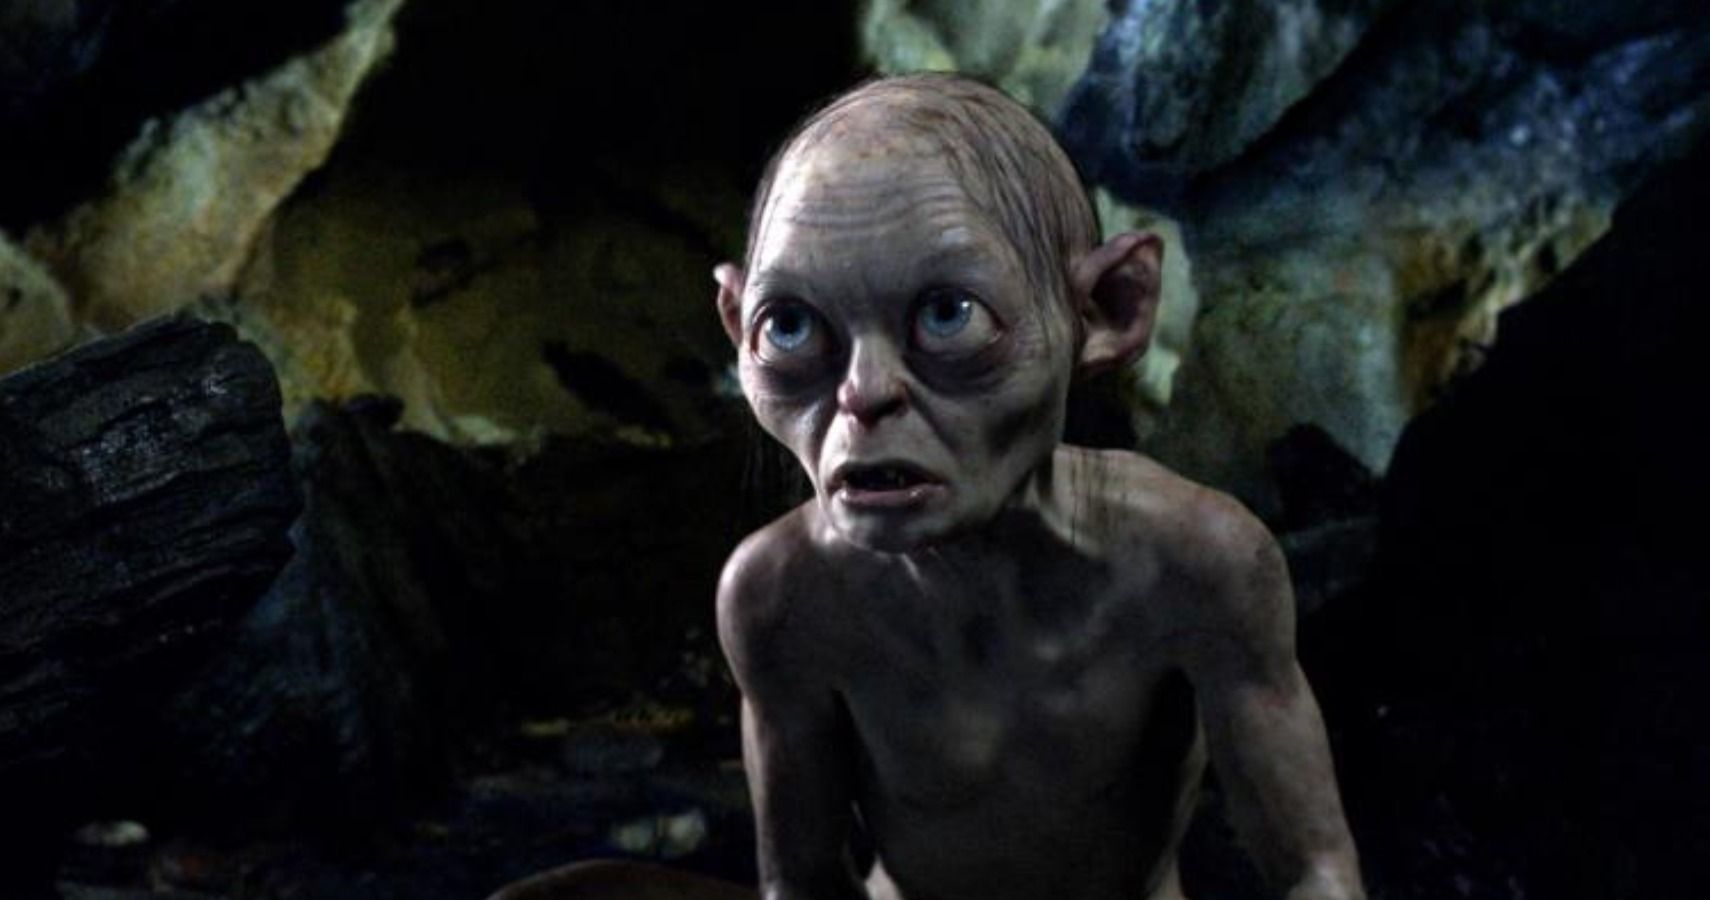 who plays gollum in the lord of the rings